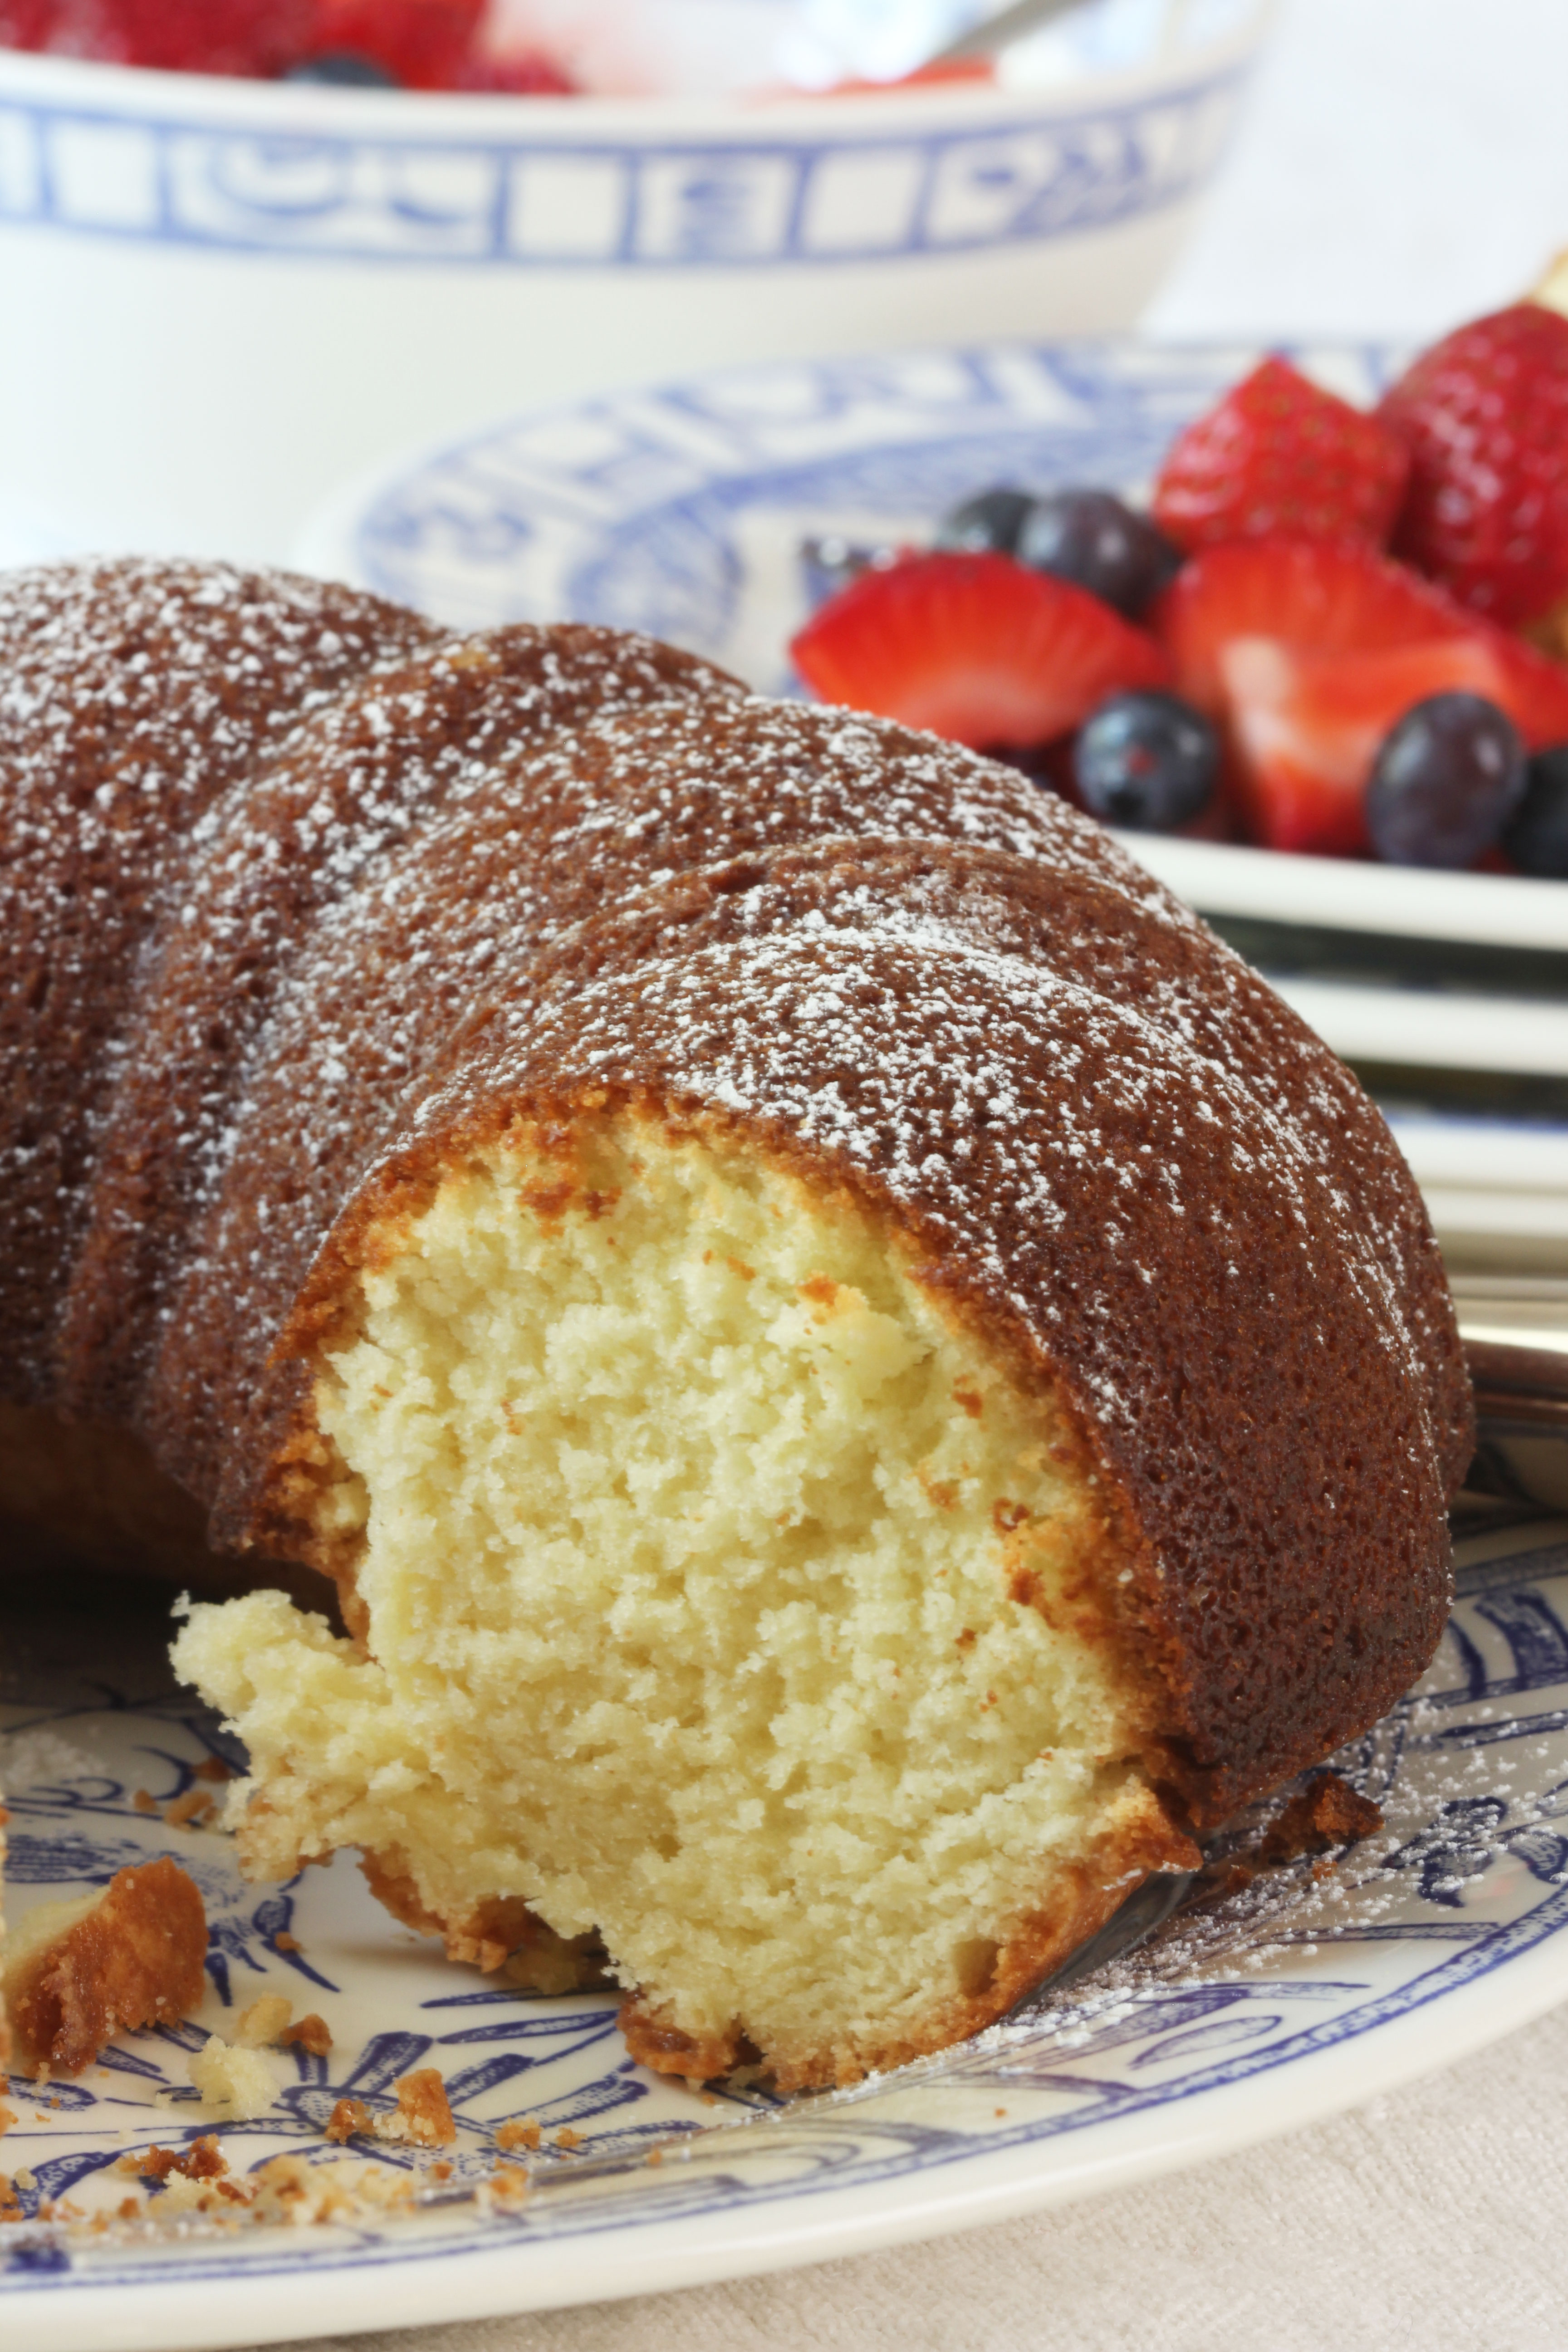 If you like Pound Cake, you will really enjoy this Bishop's Cake. Serve it as a dessert, afternoon tea or for breakfast with fresh berries.